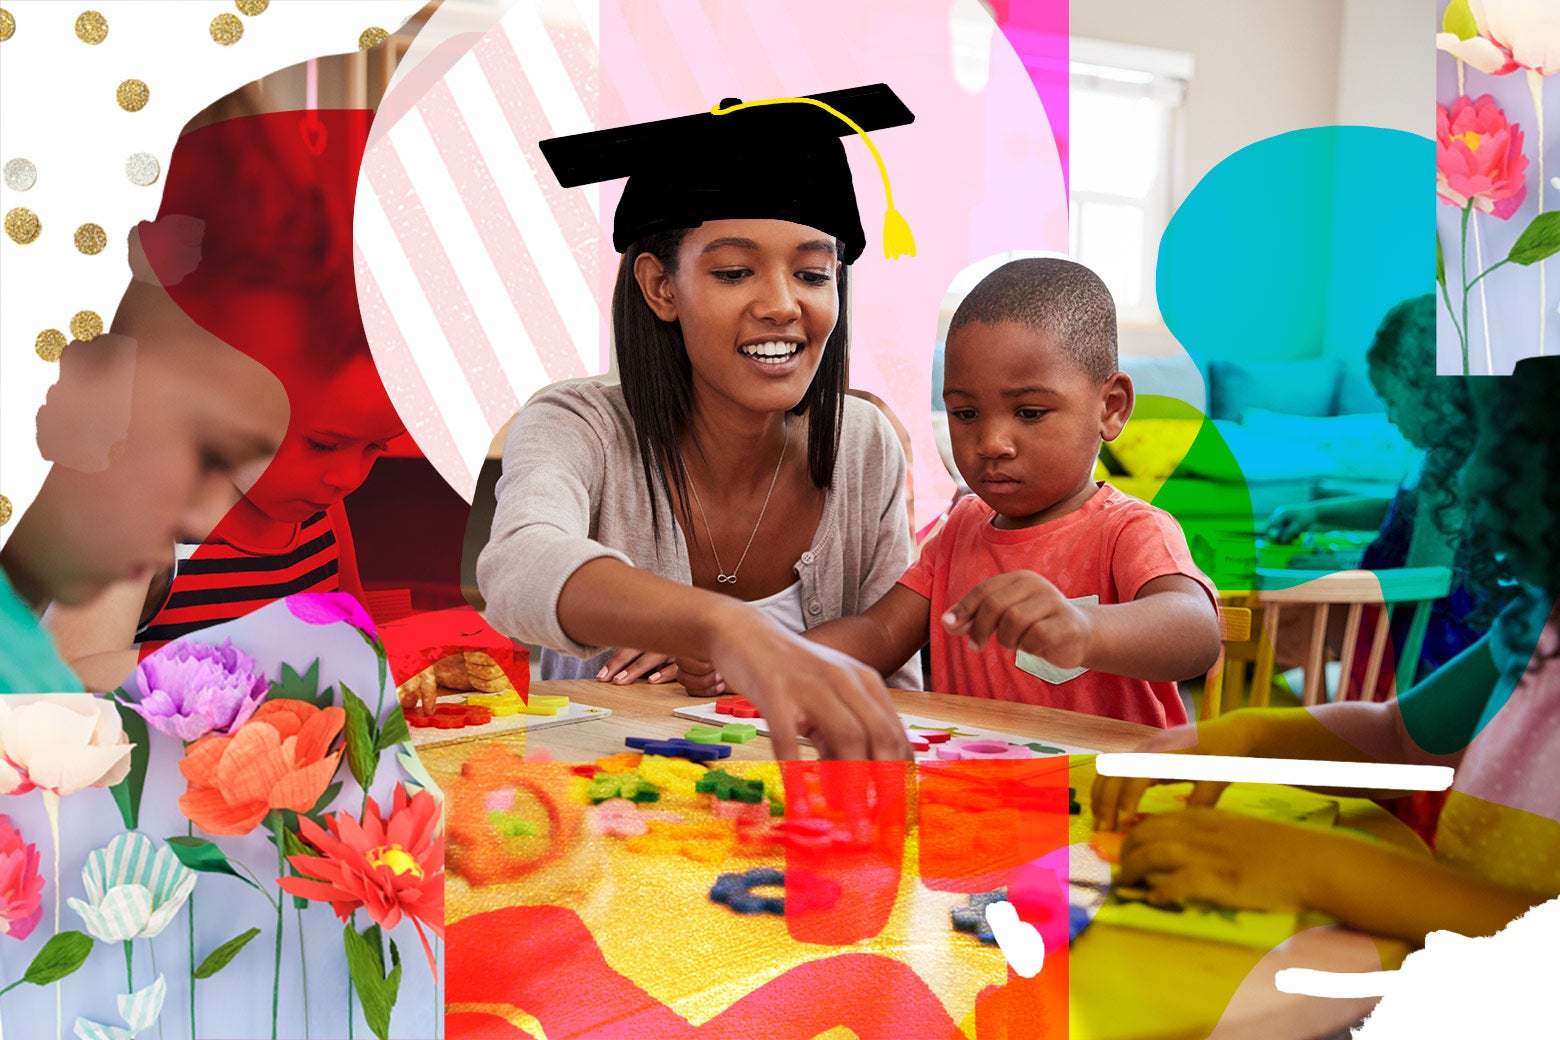 Photo illustration: A stock image of an early childhood education professional at play with students. There is a graduate's cap edited on to the teacher's head.